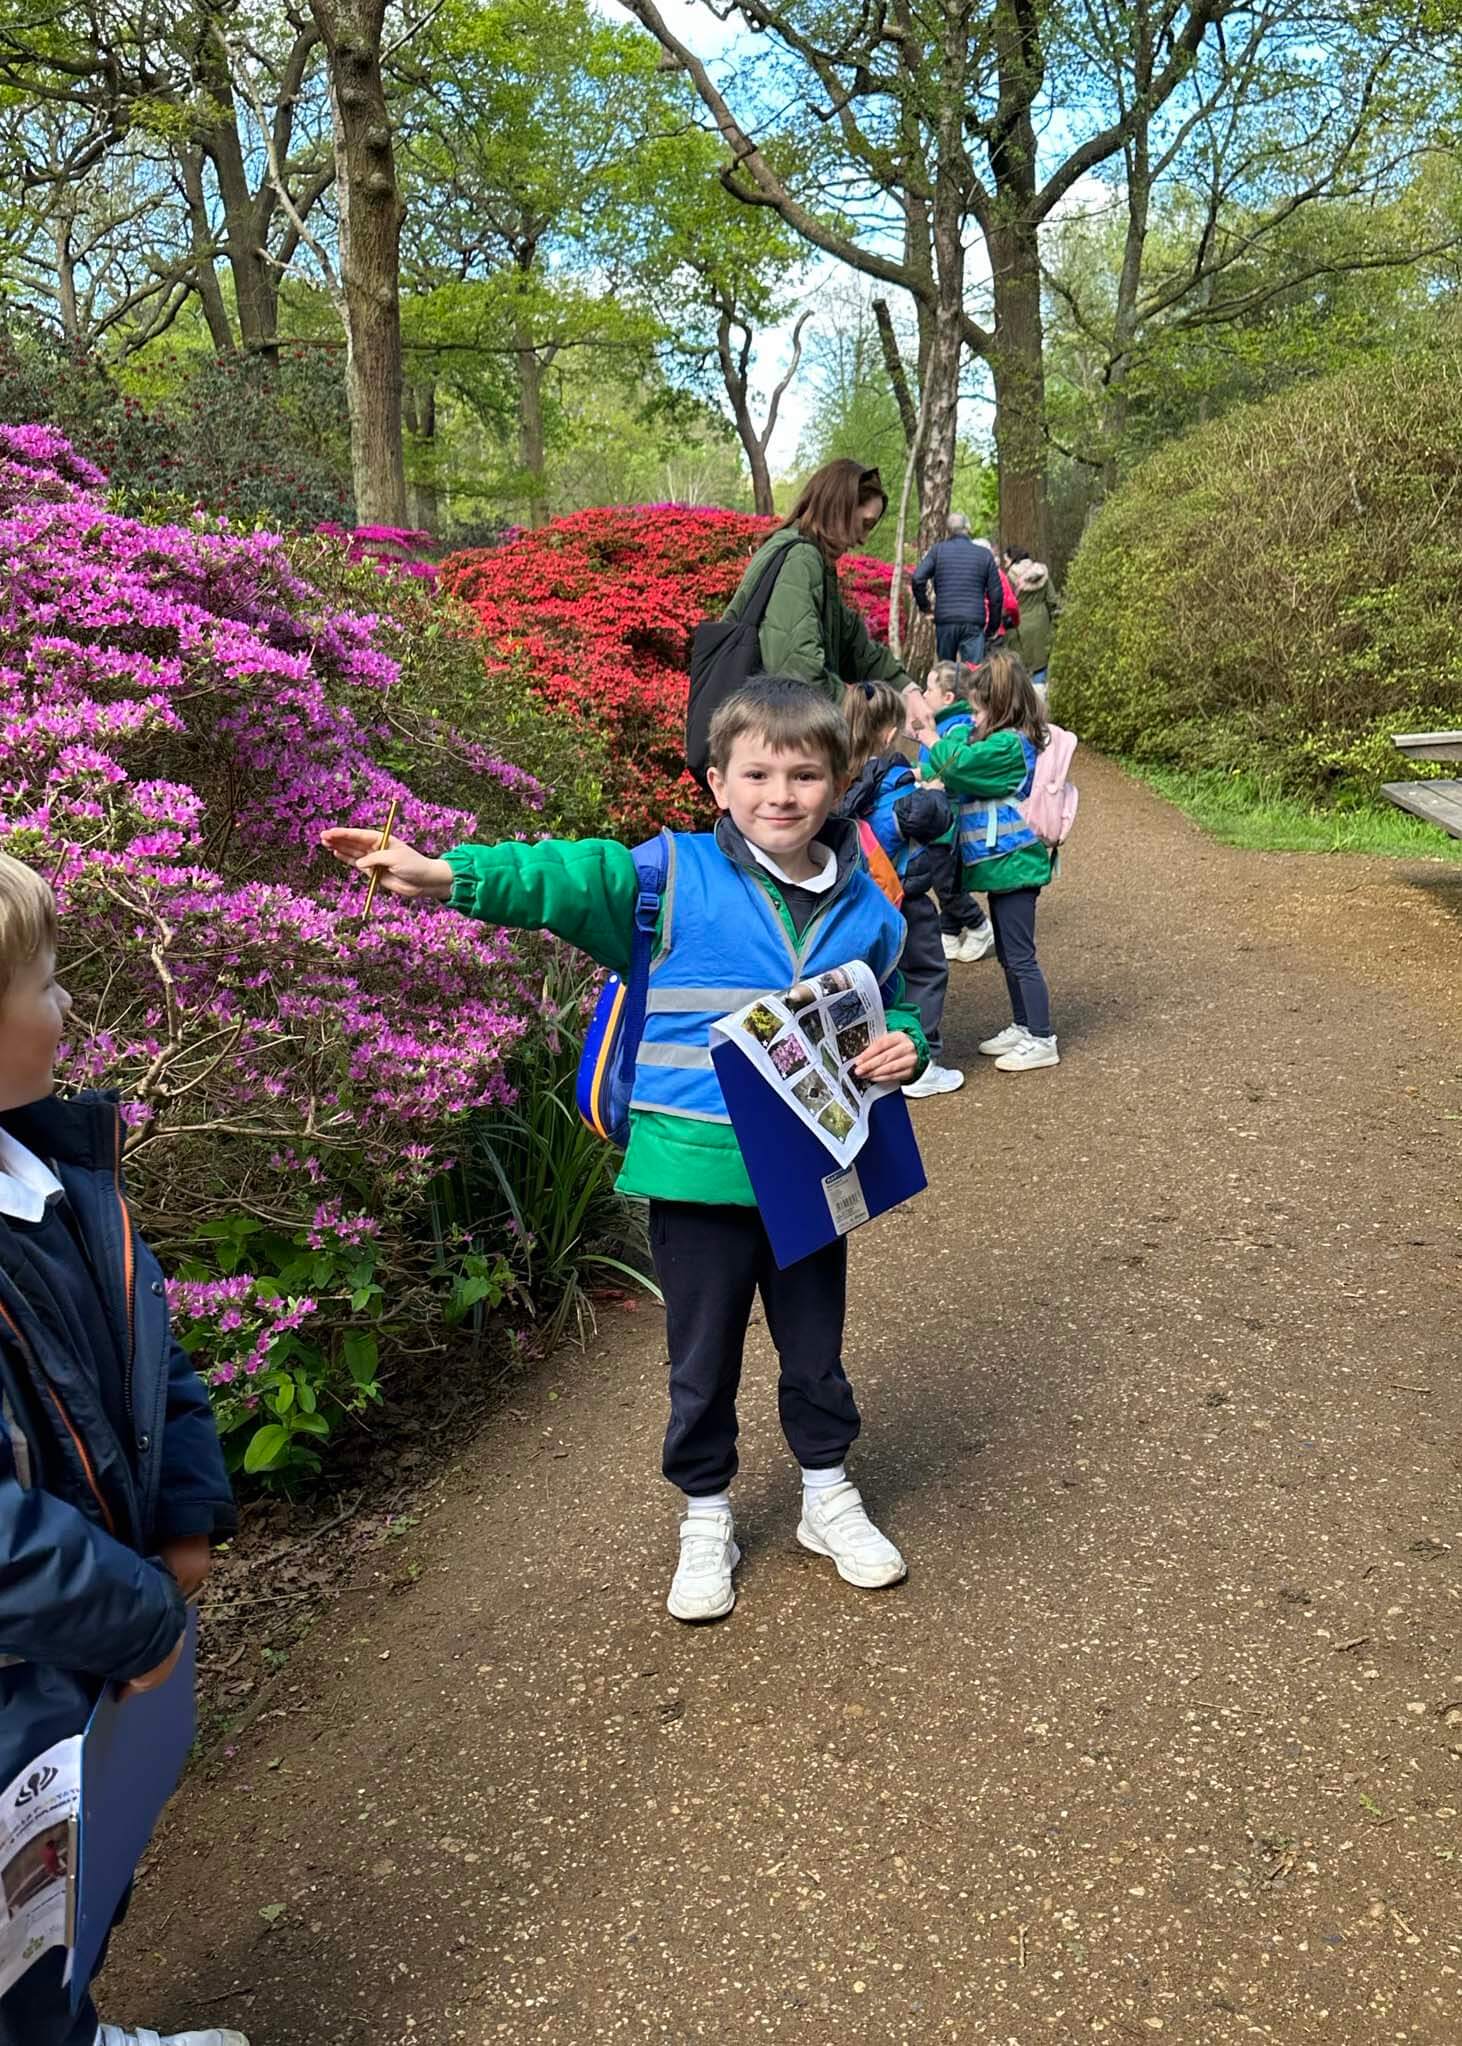 Kindergarten pupil pointing at the flowers | Ibstock Place School, a private school near Richmond, Barnes, Putney, Kingston, and Wandsworth.